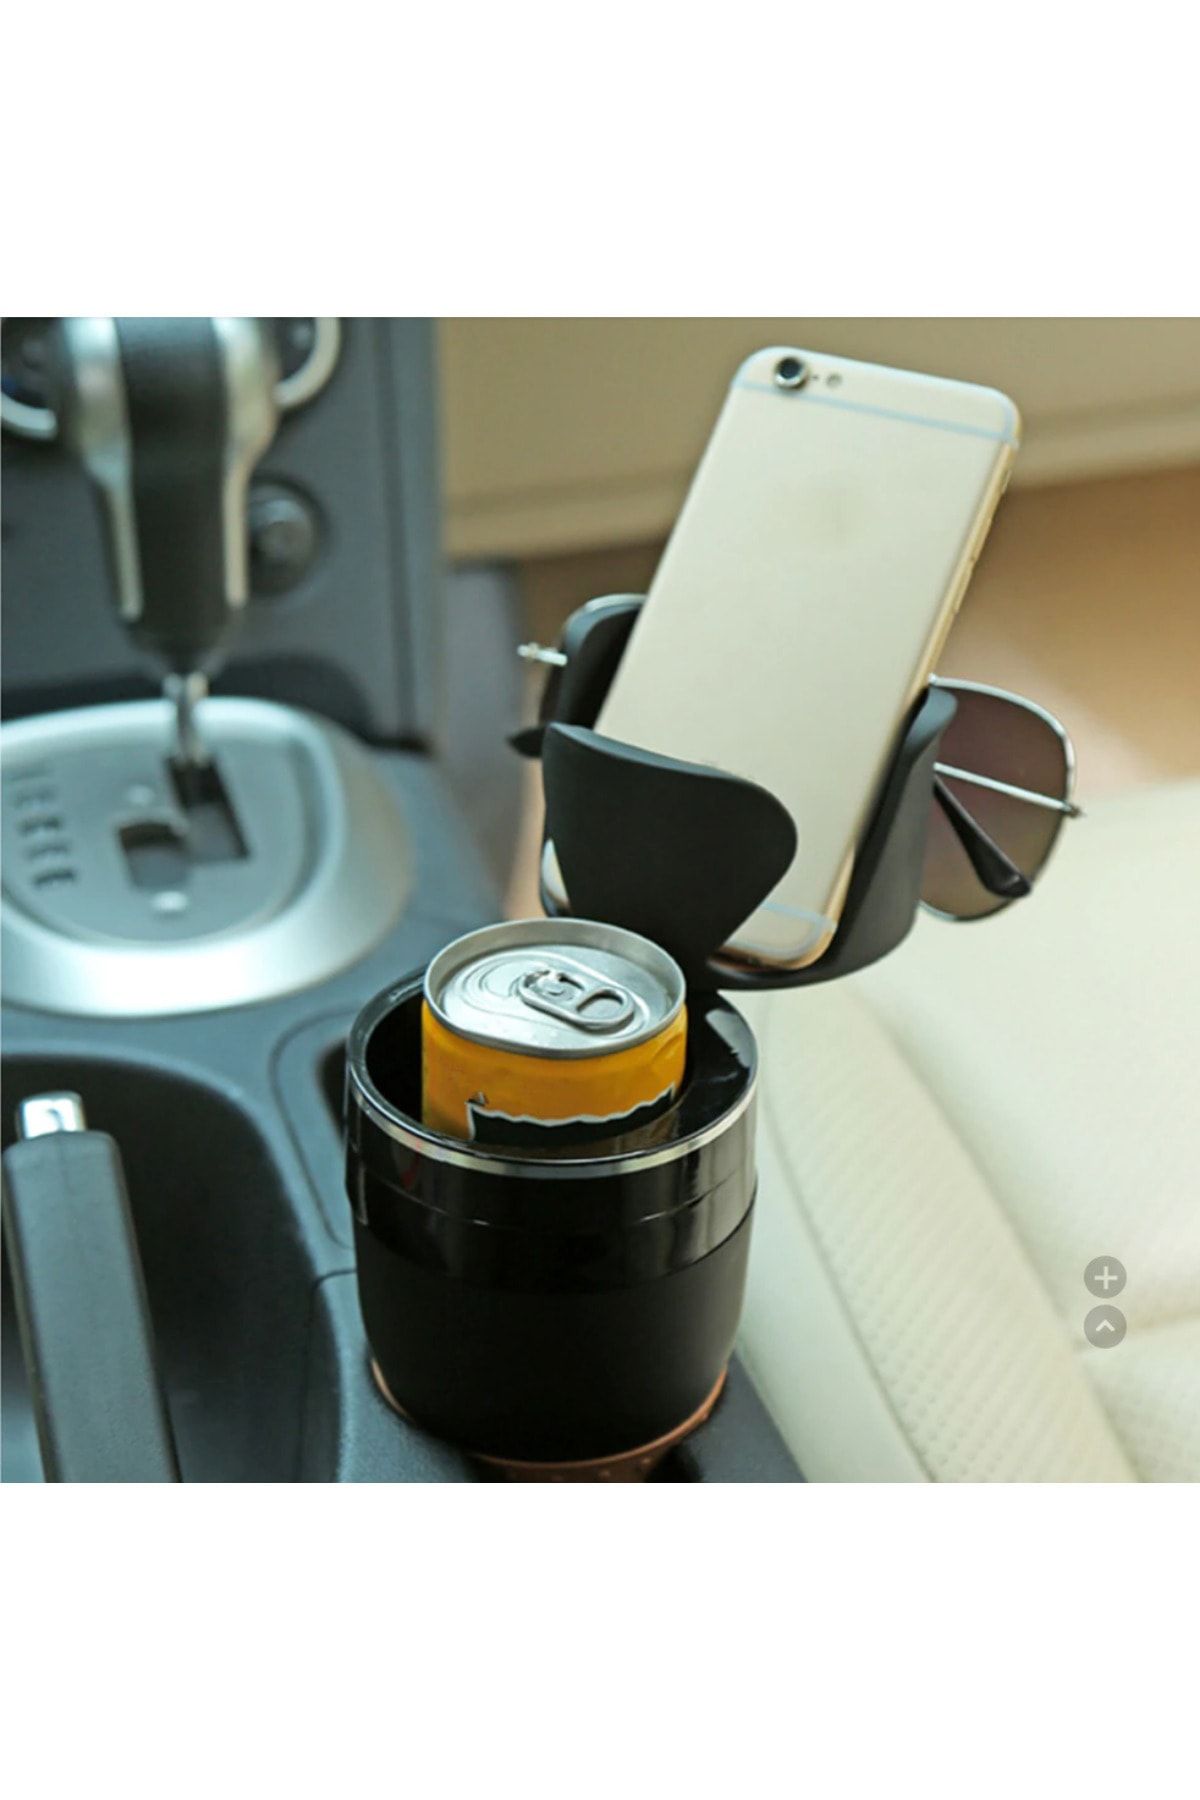 Ankanorm Functional Cup And Phone Holder Car Interior Cup Holder